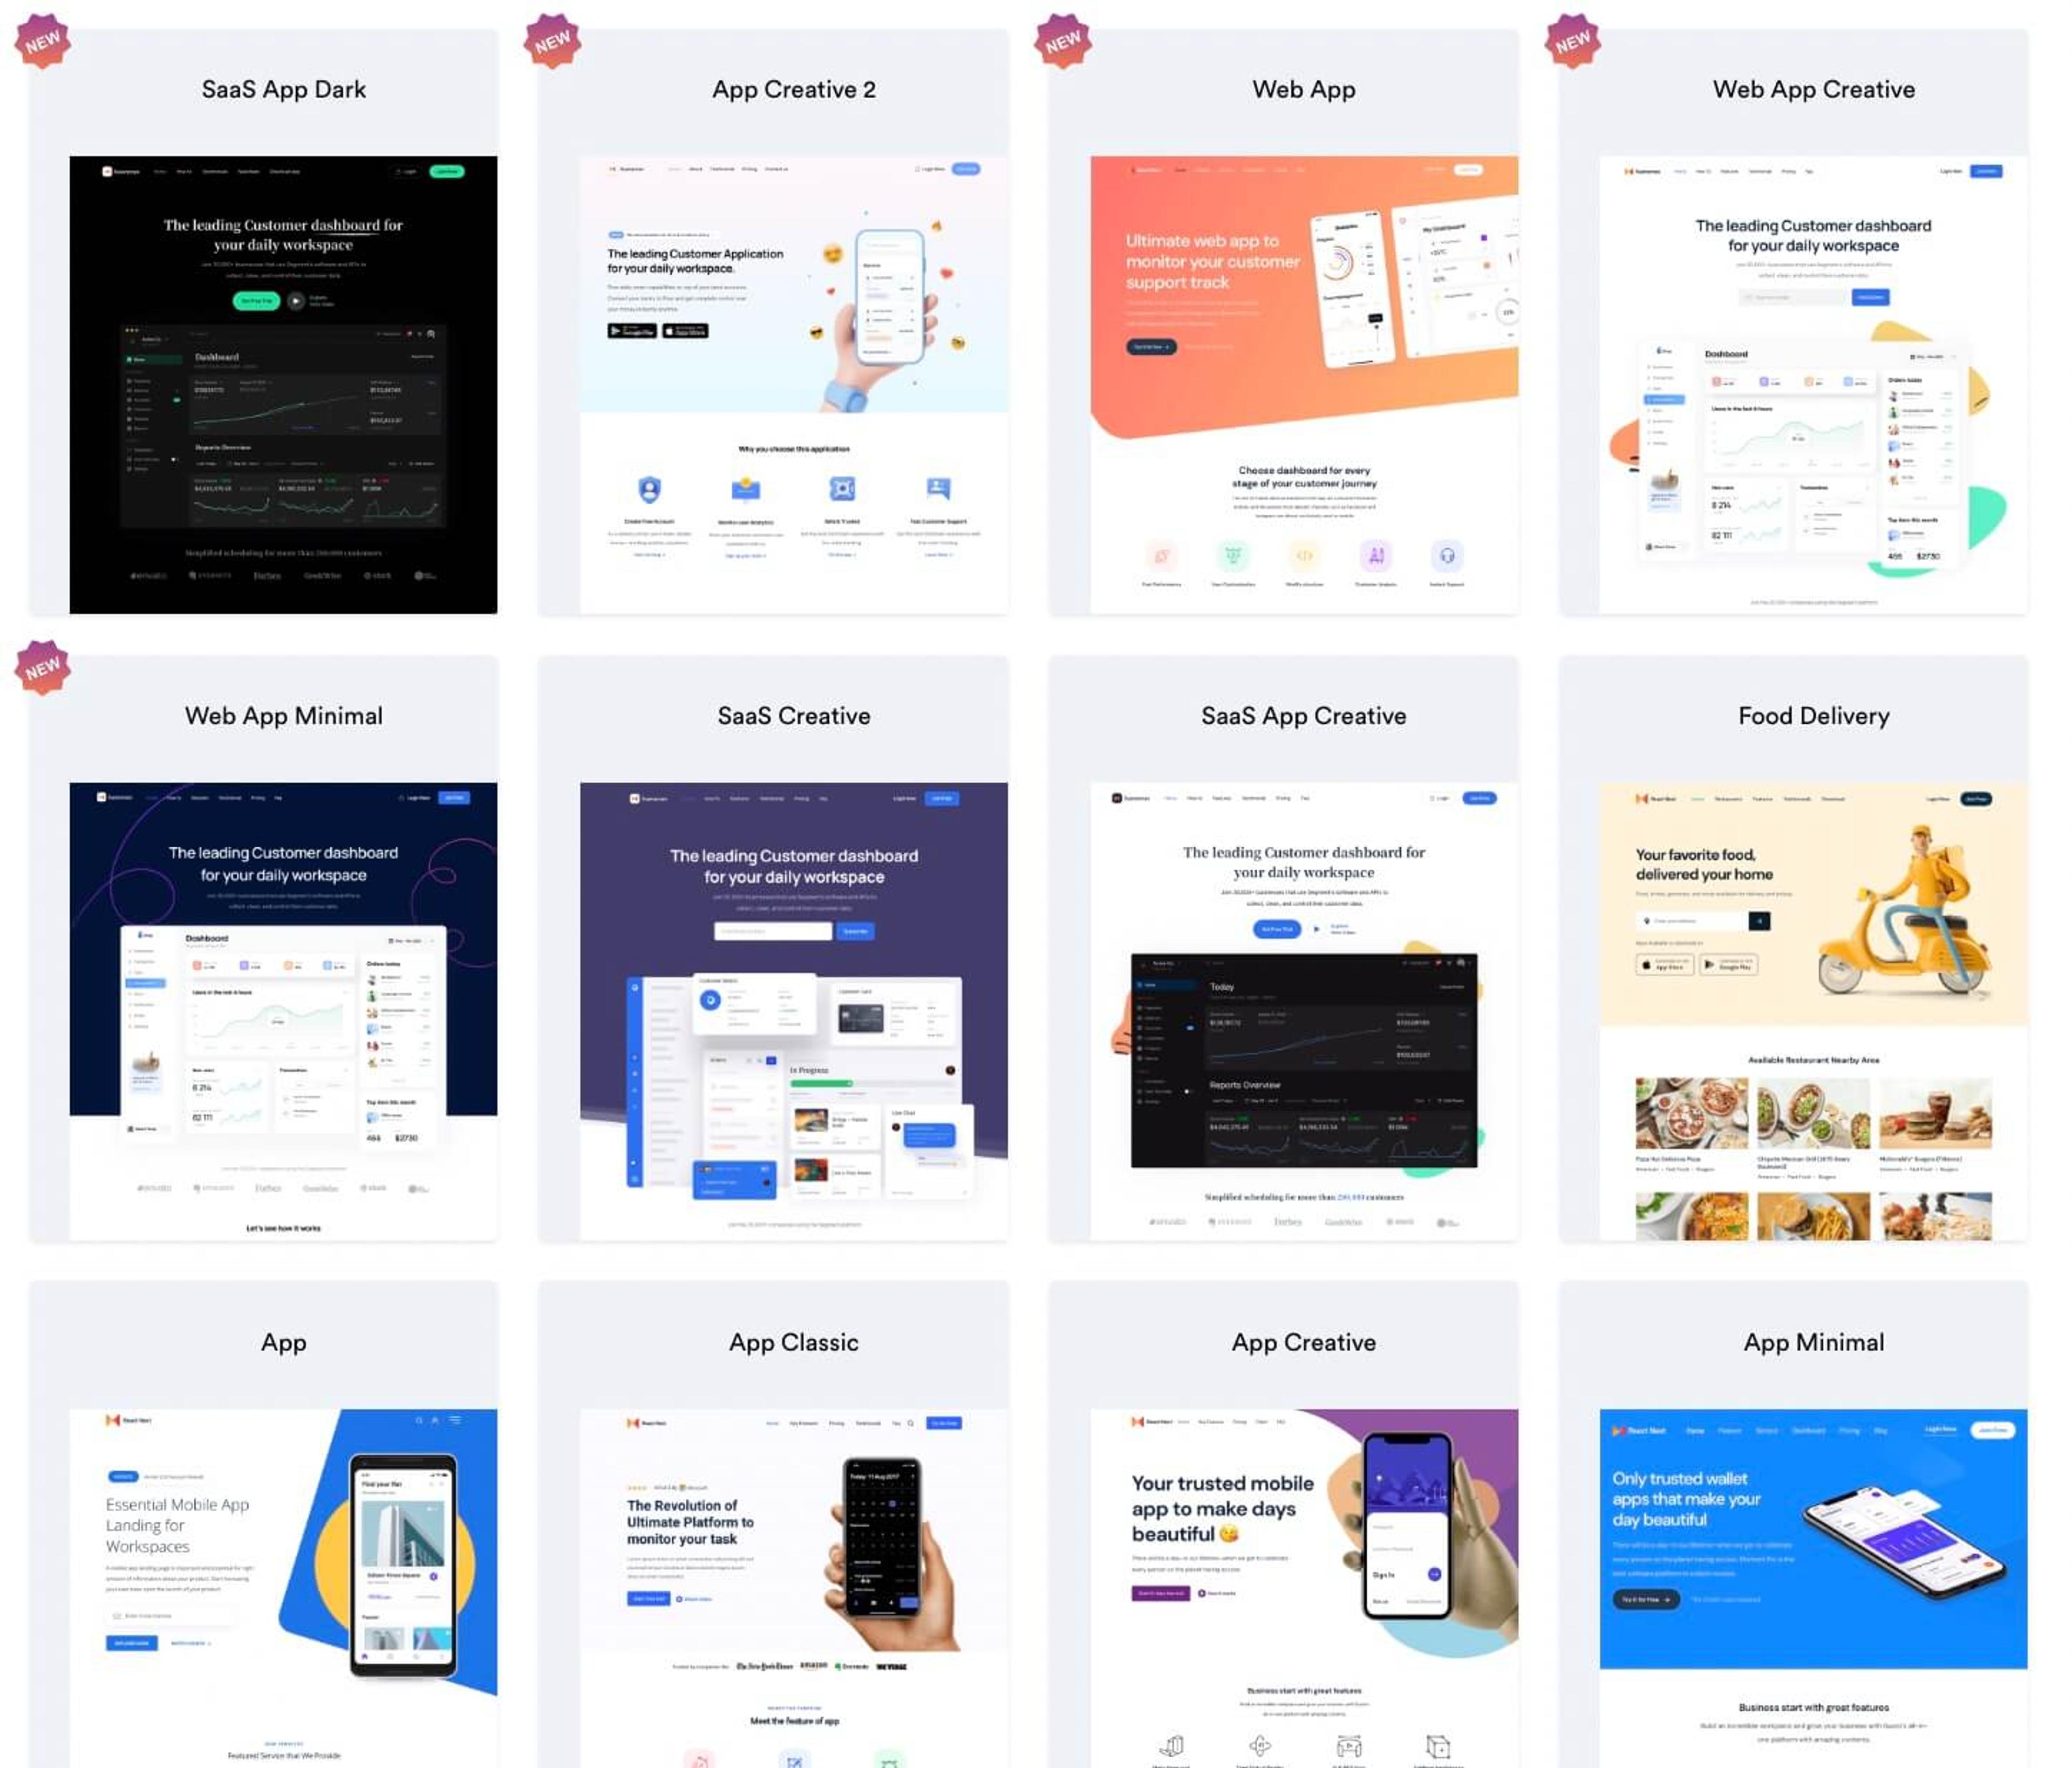 Examples of various landing pages available such as SaaS App Dark, Food Delivery, and more.